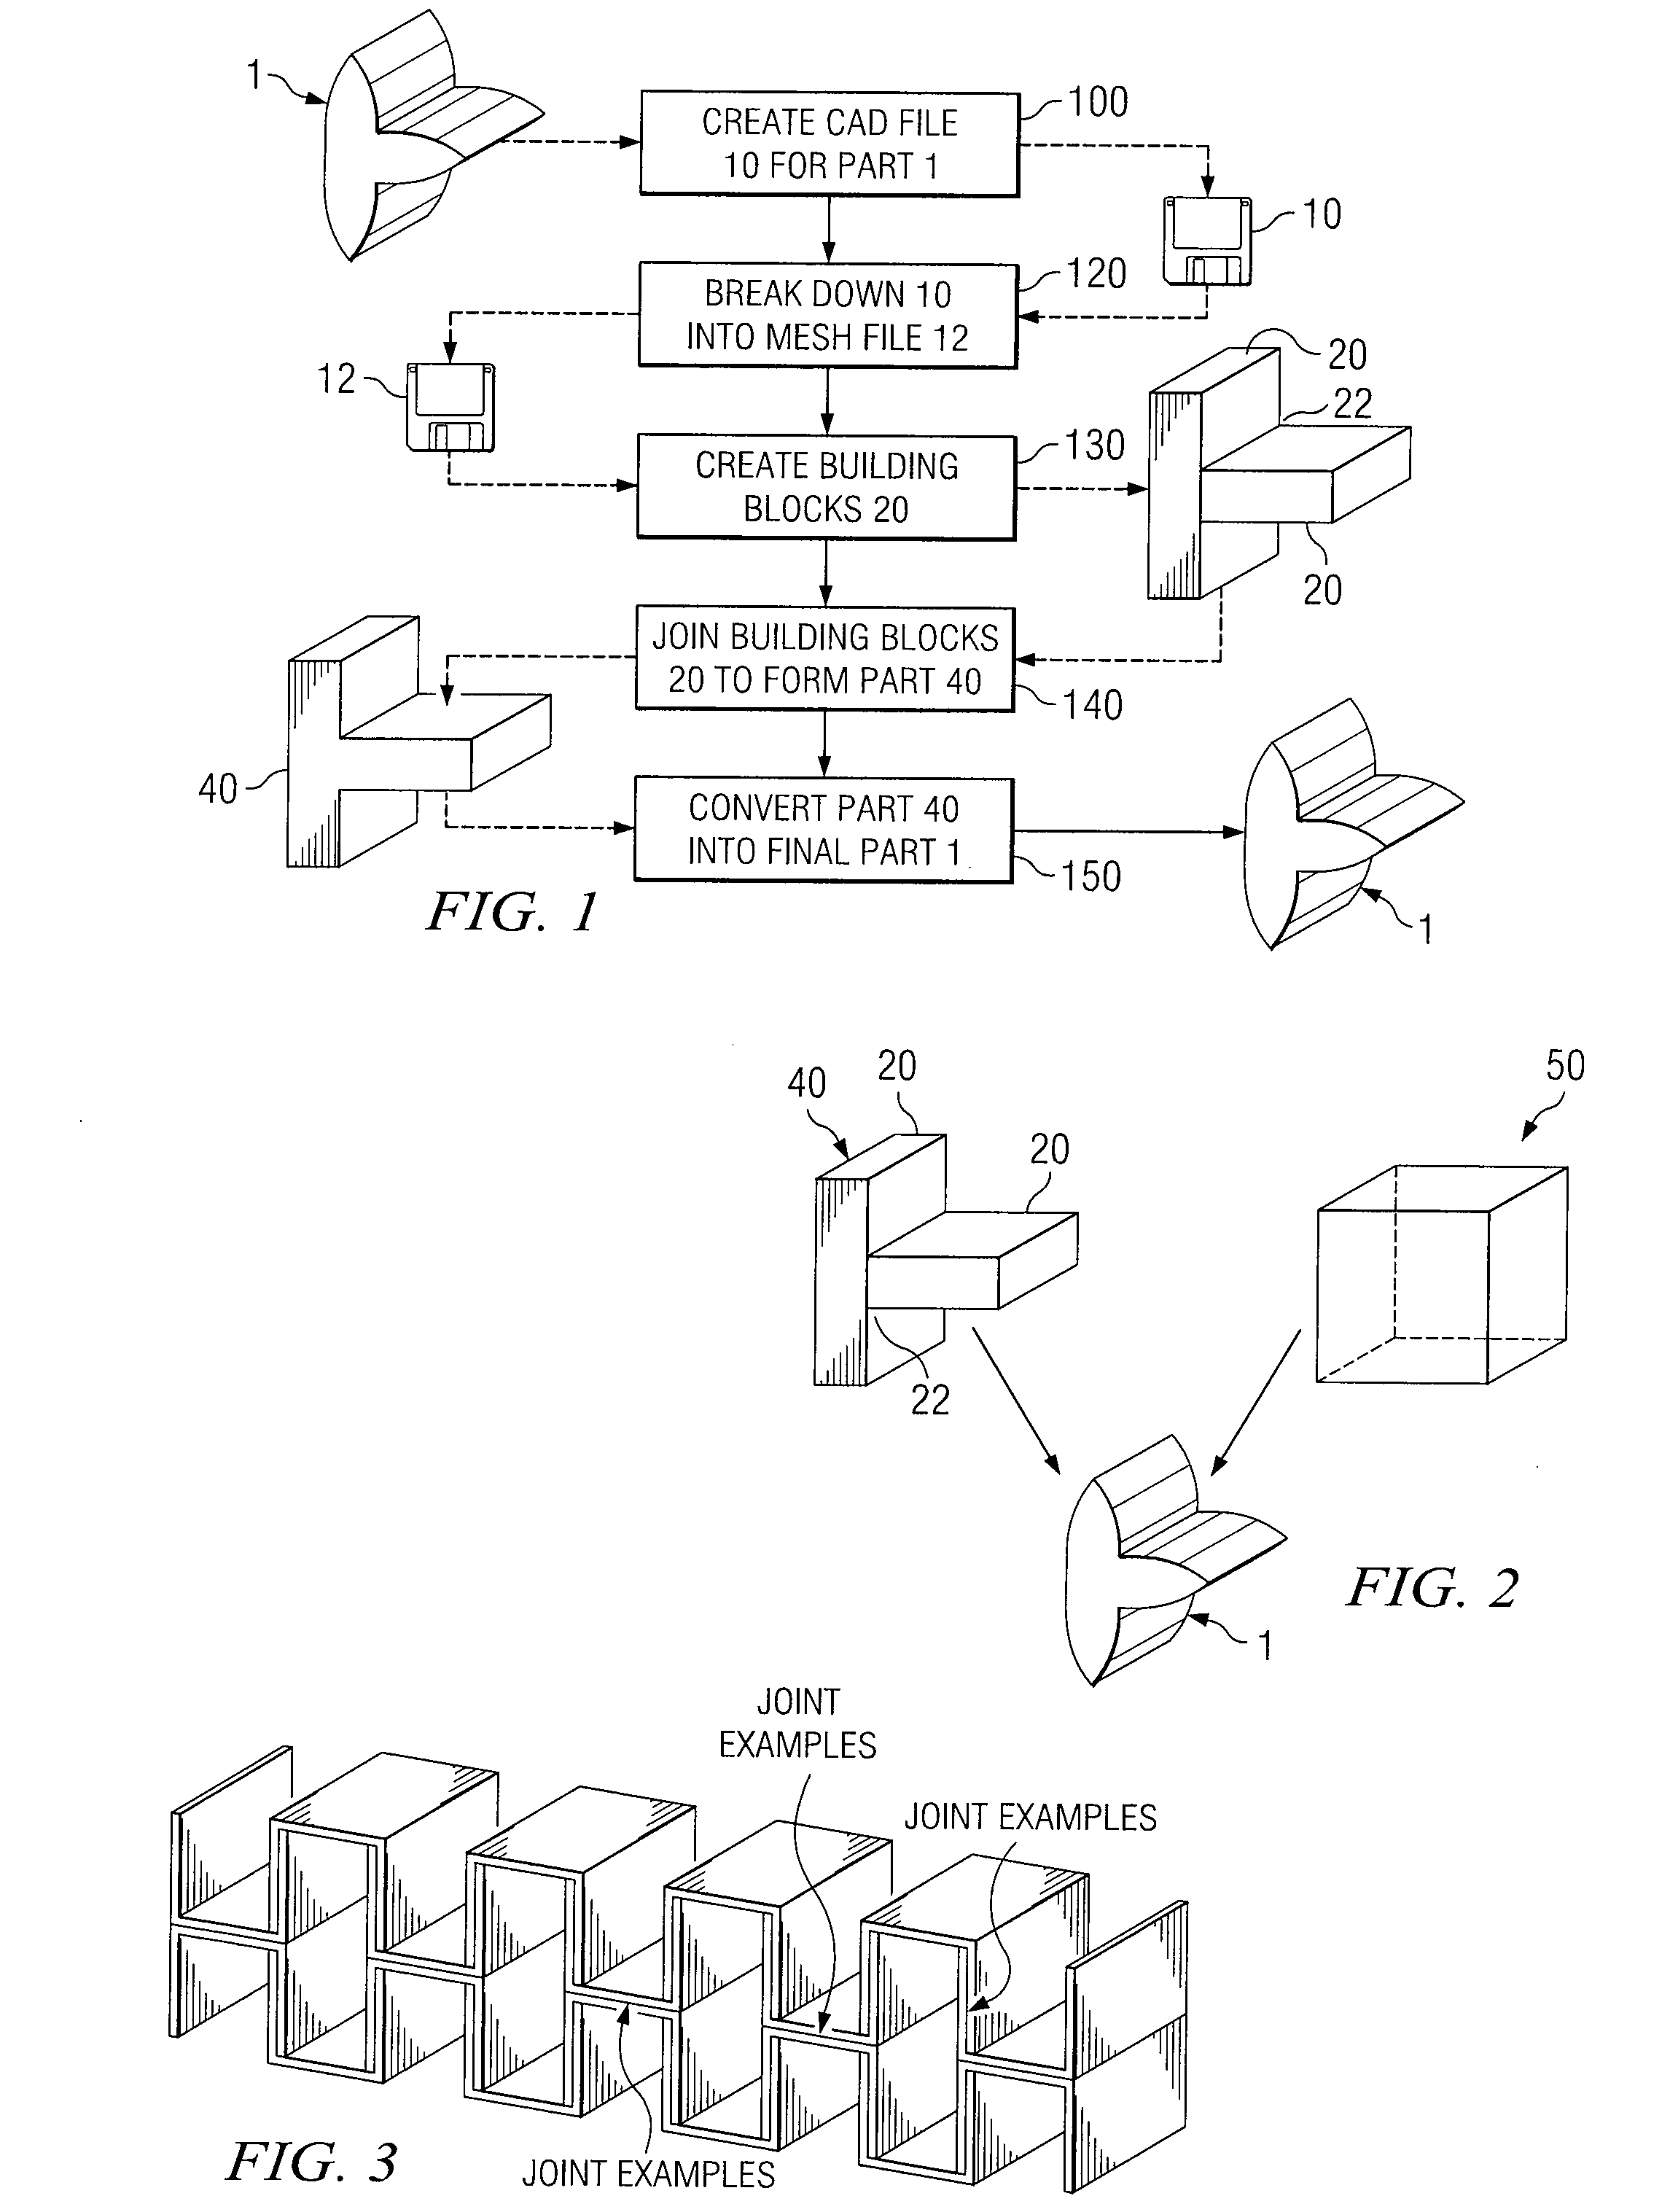 Method to construct and physically join building blocks into a near-net shaped part using an interfacial reaction-activation mechanism